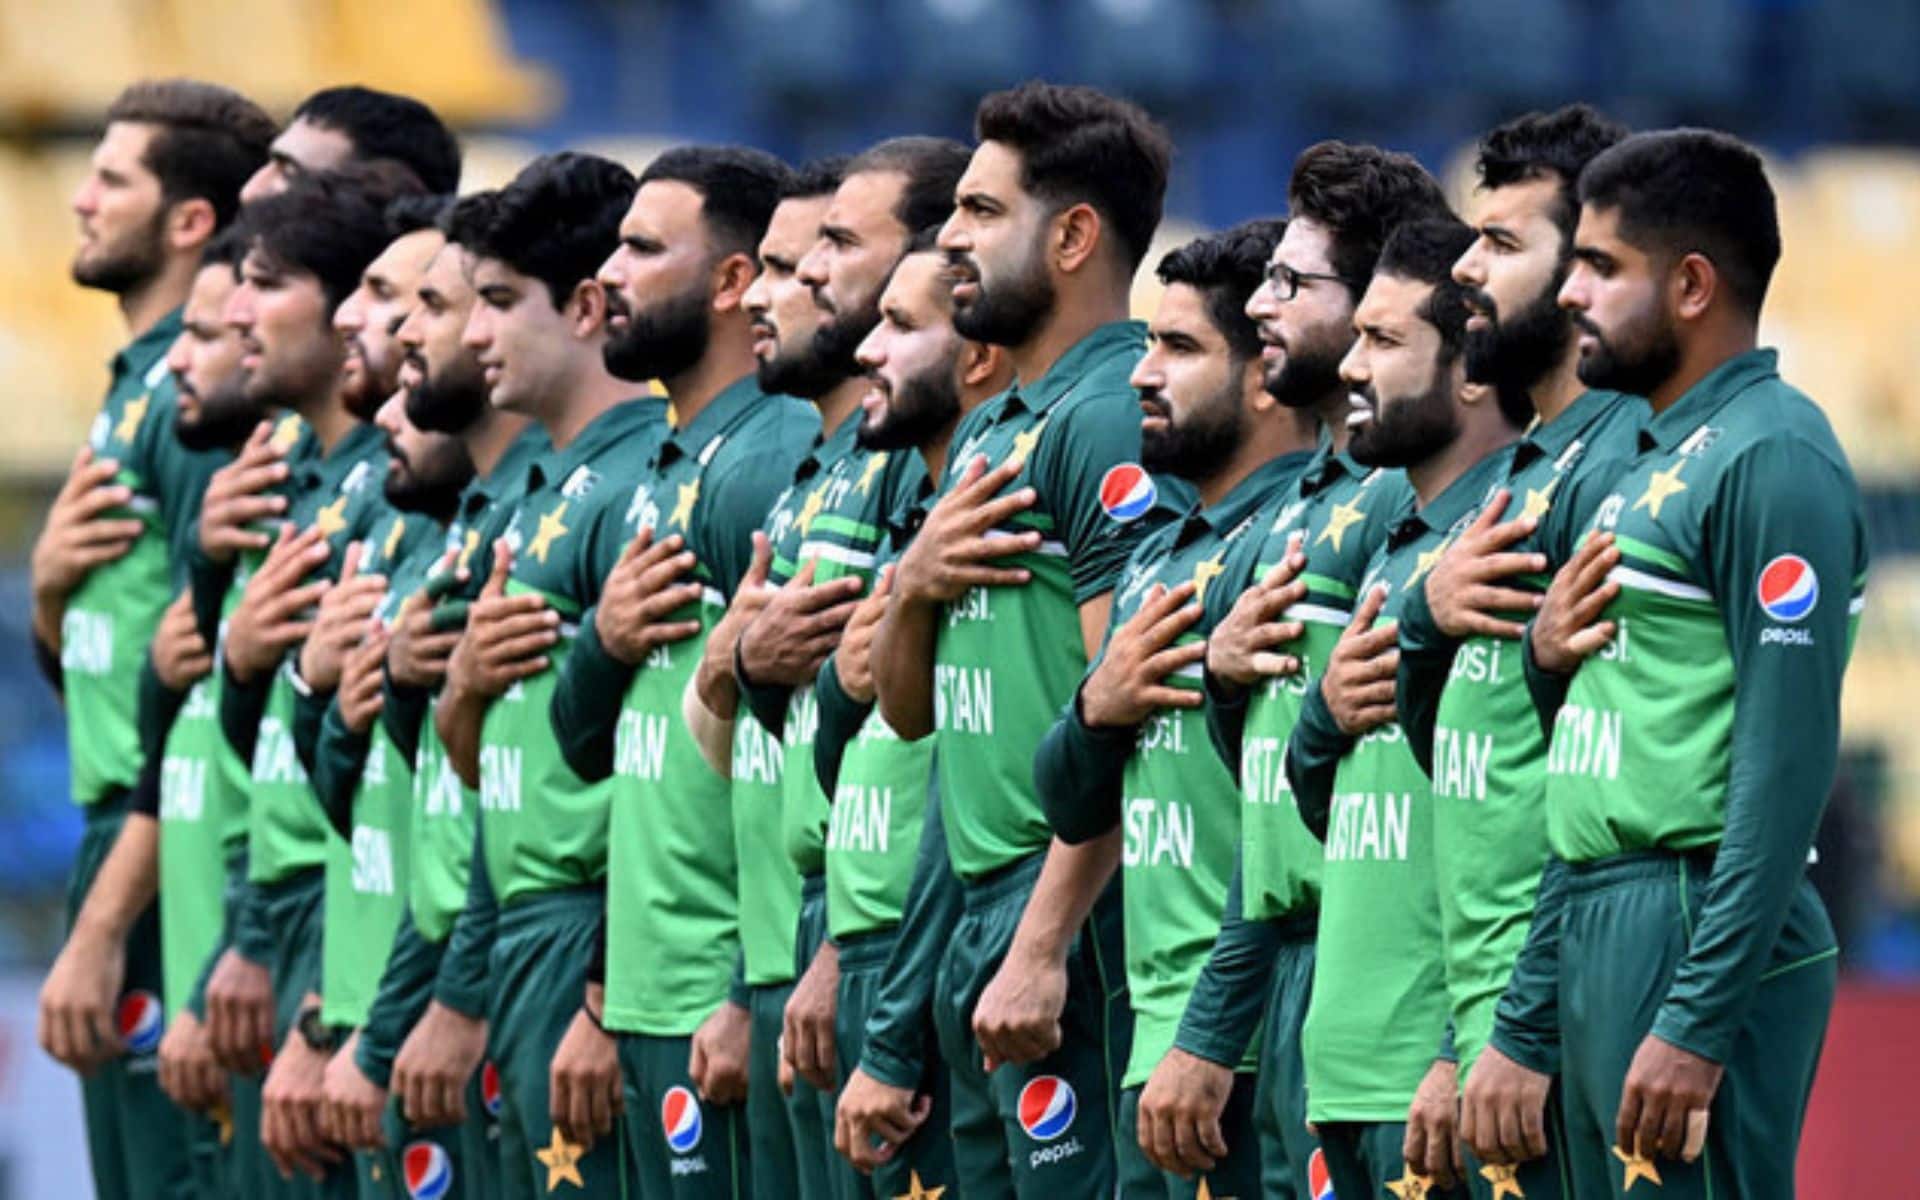 Pakistan players standing in cue (x.com)